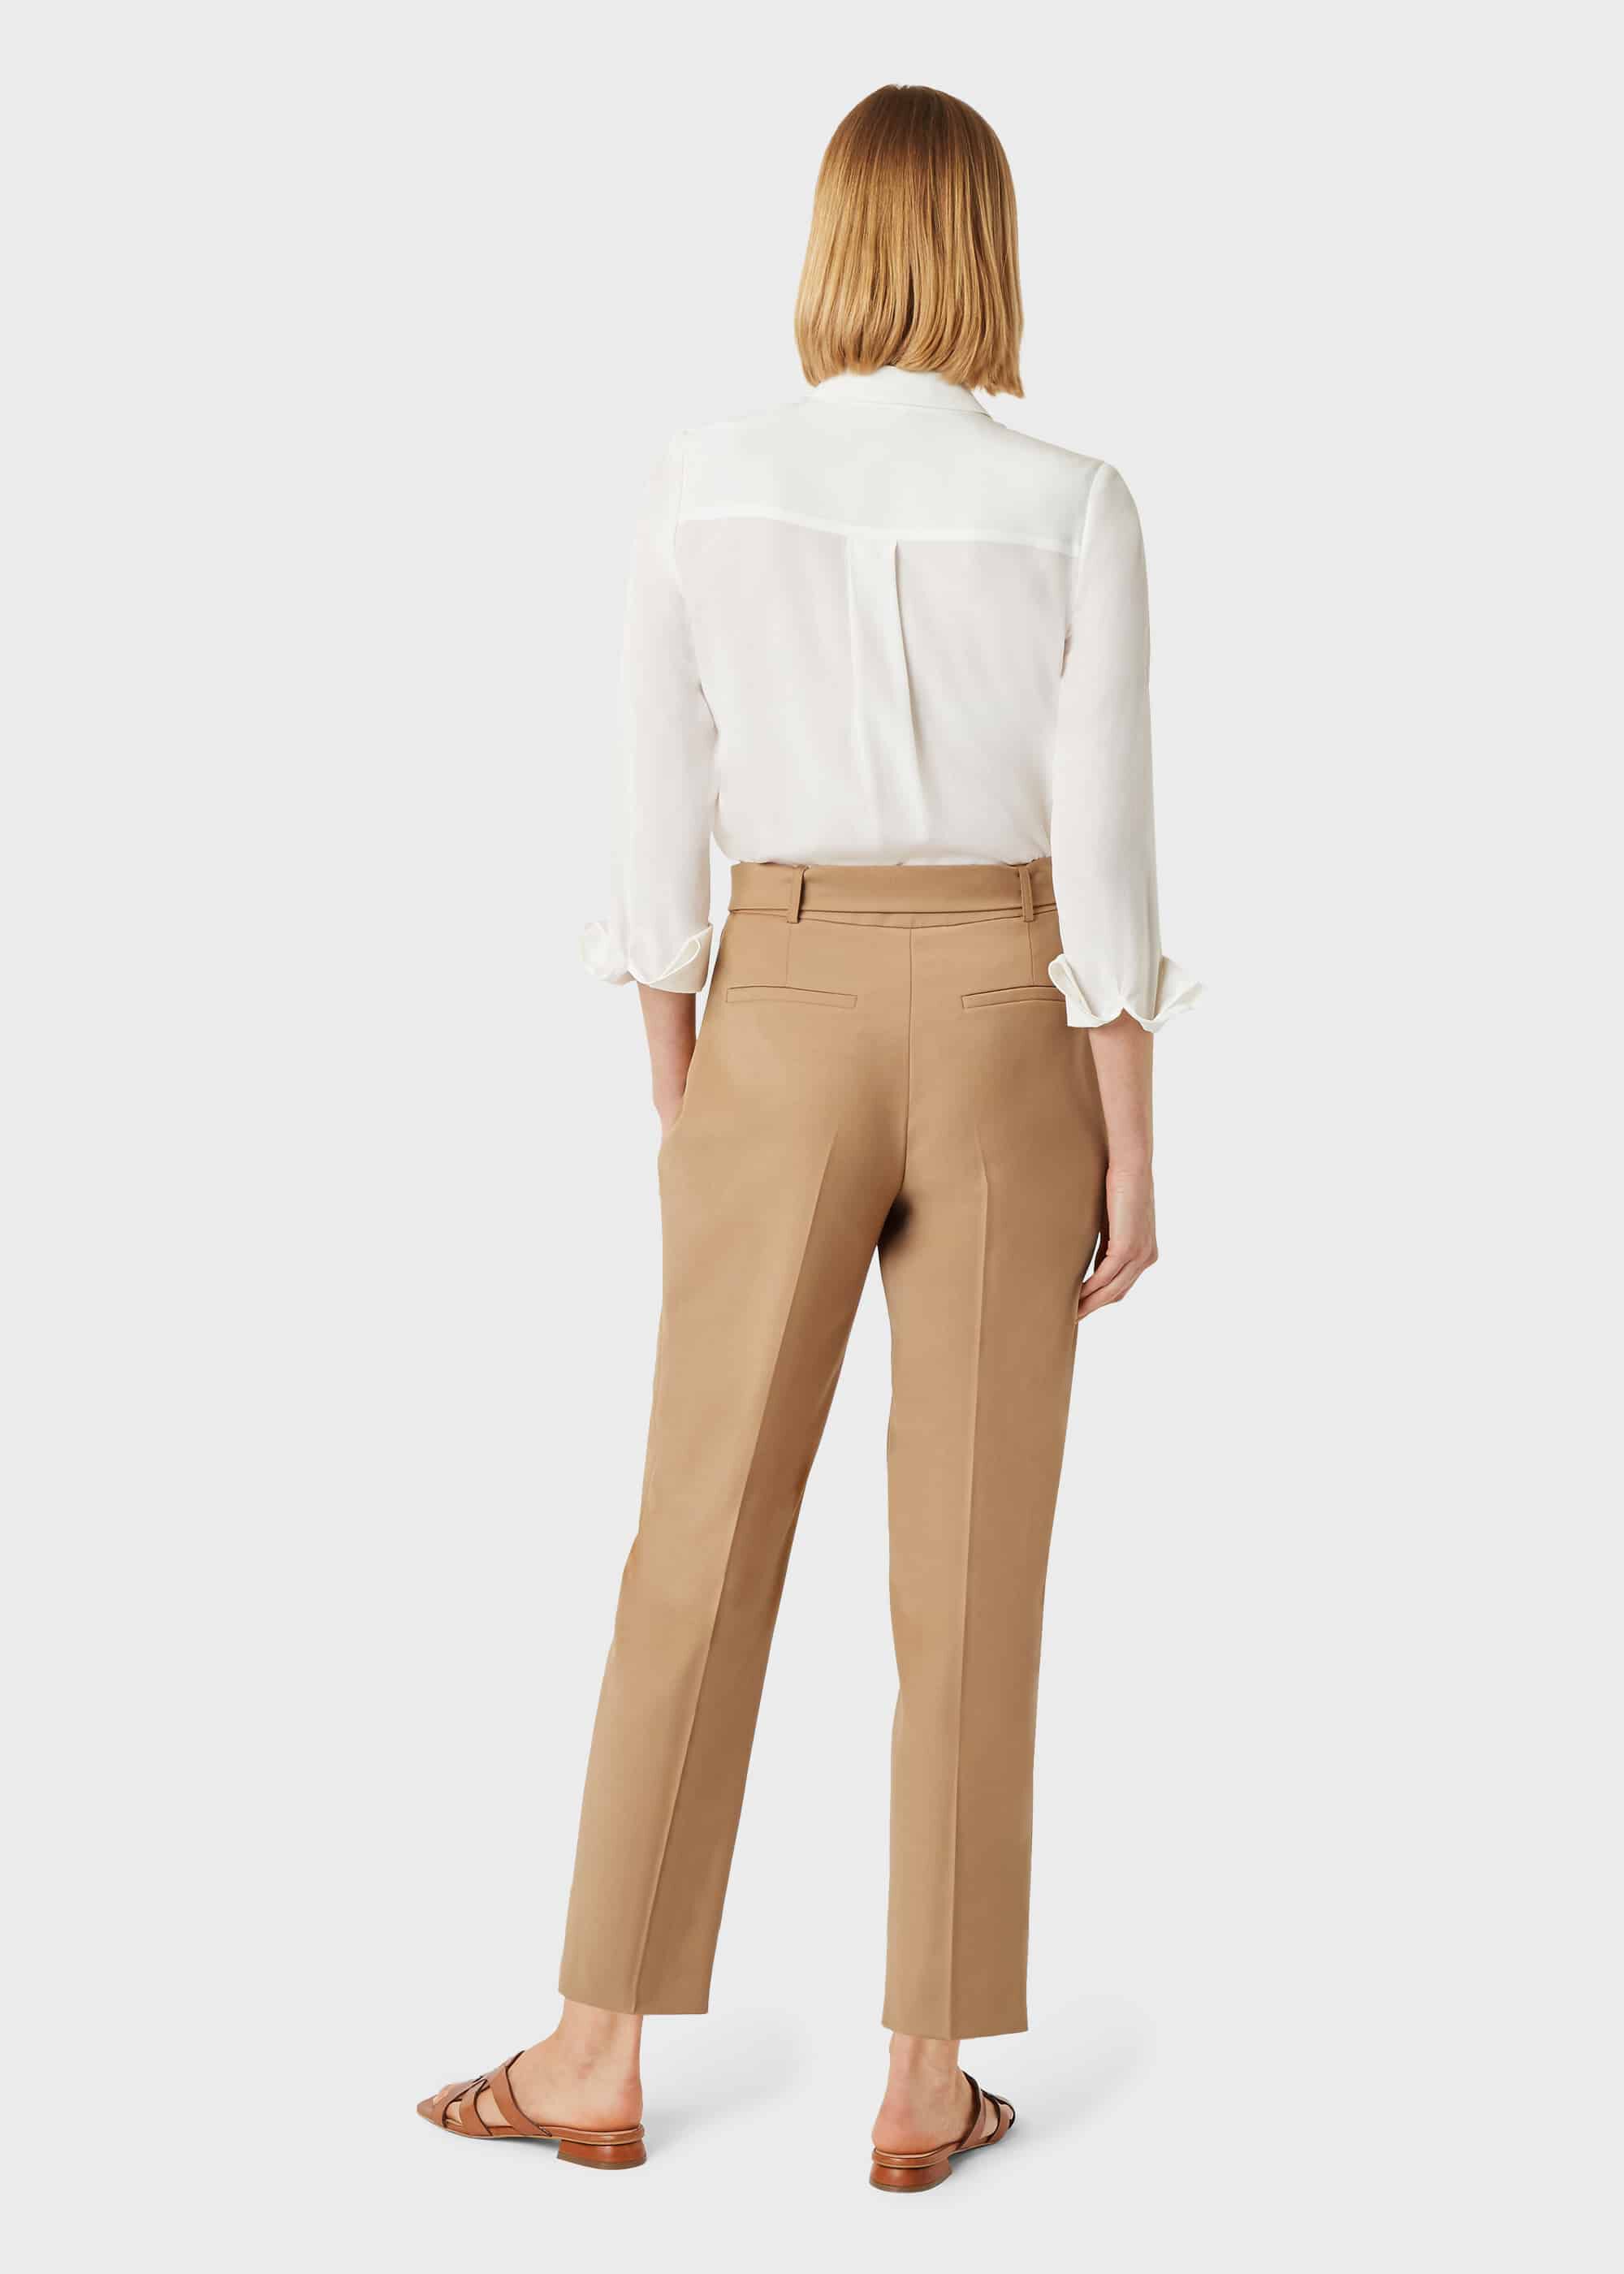 ASOS EDITION tailored trousers in camel | ASOS